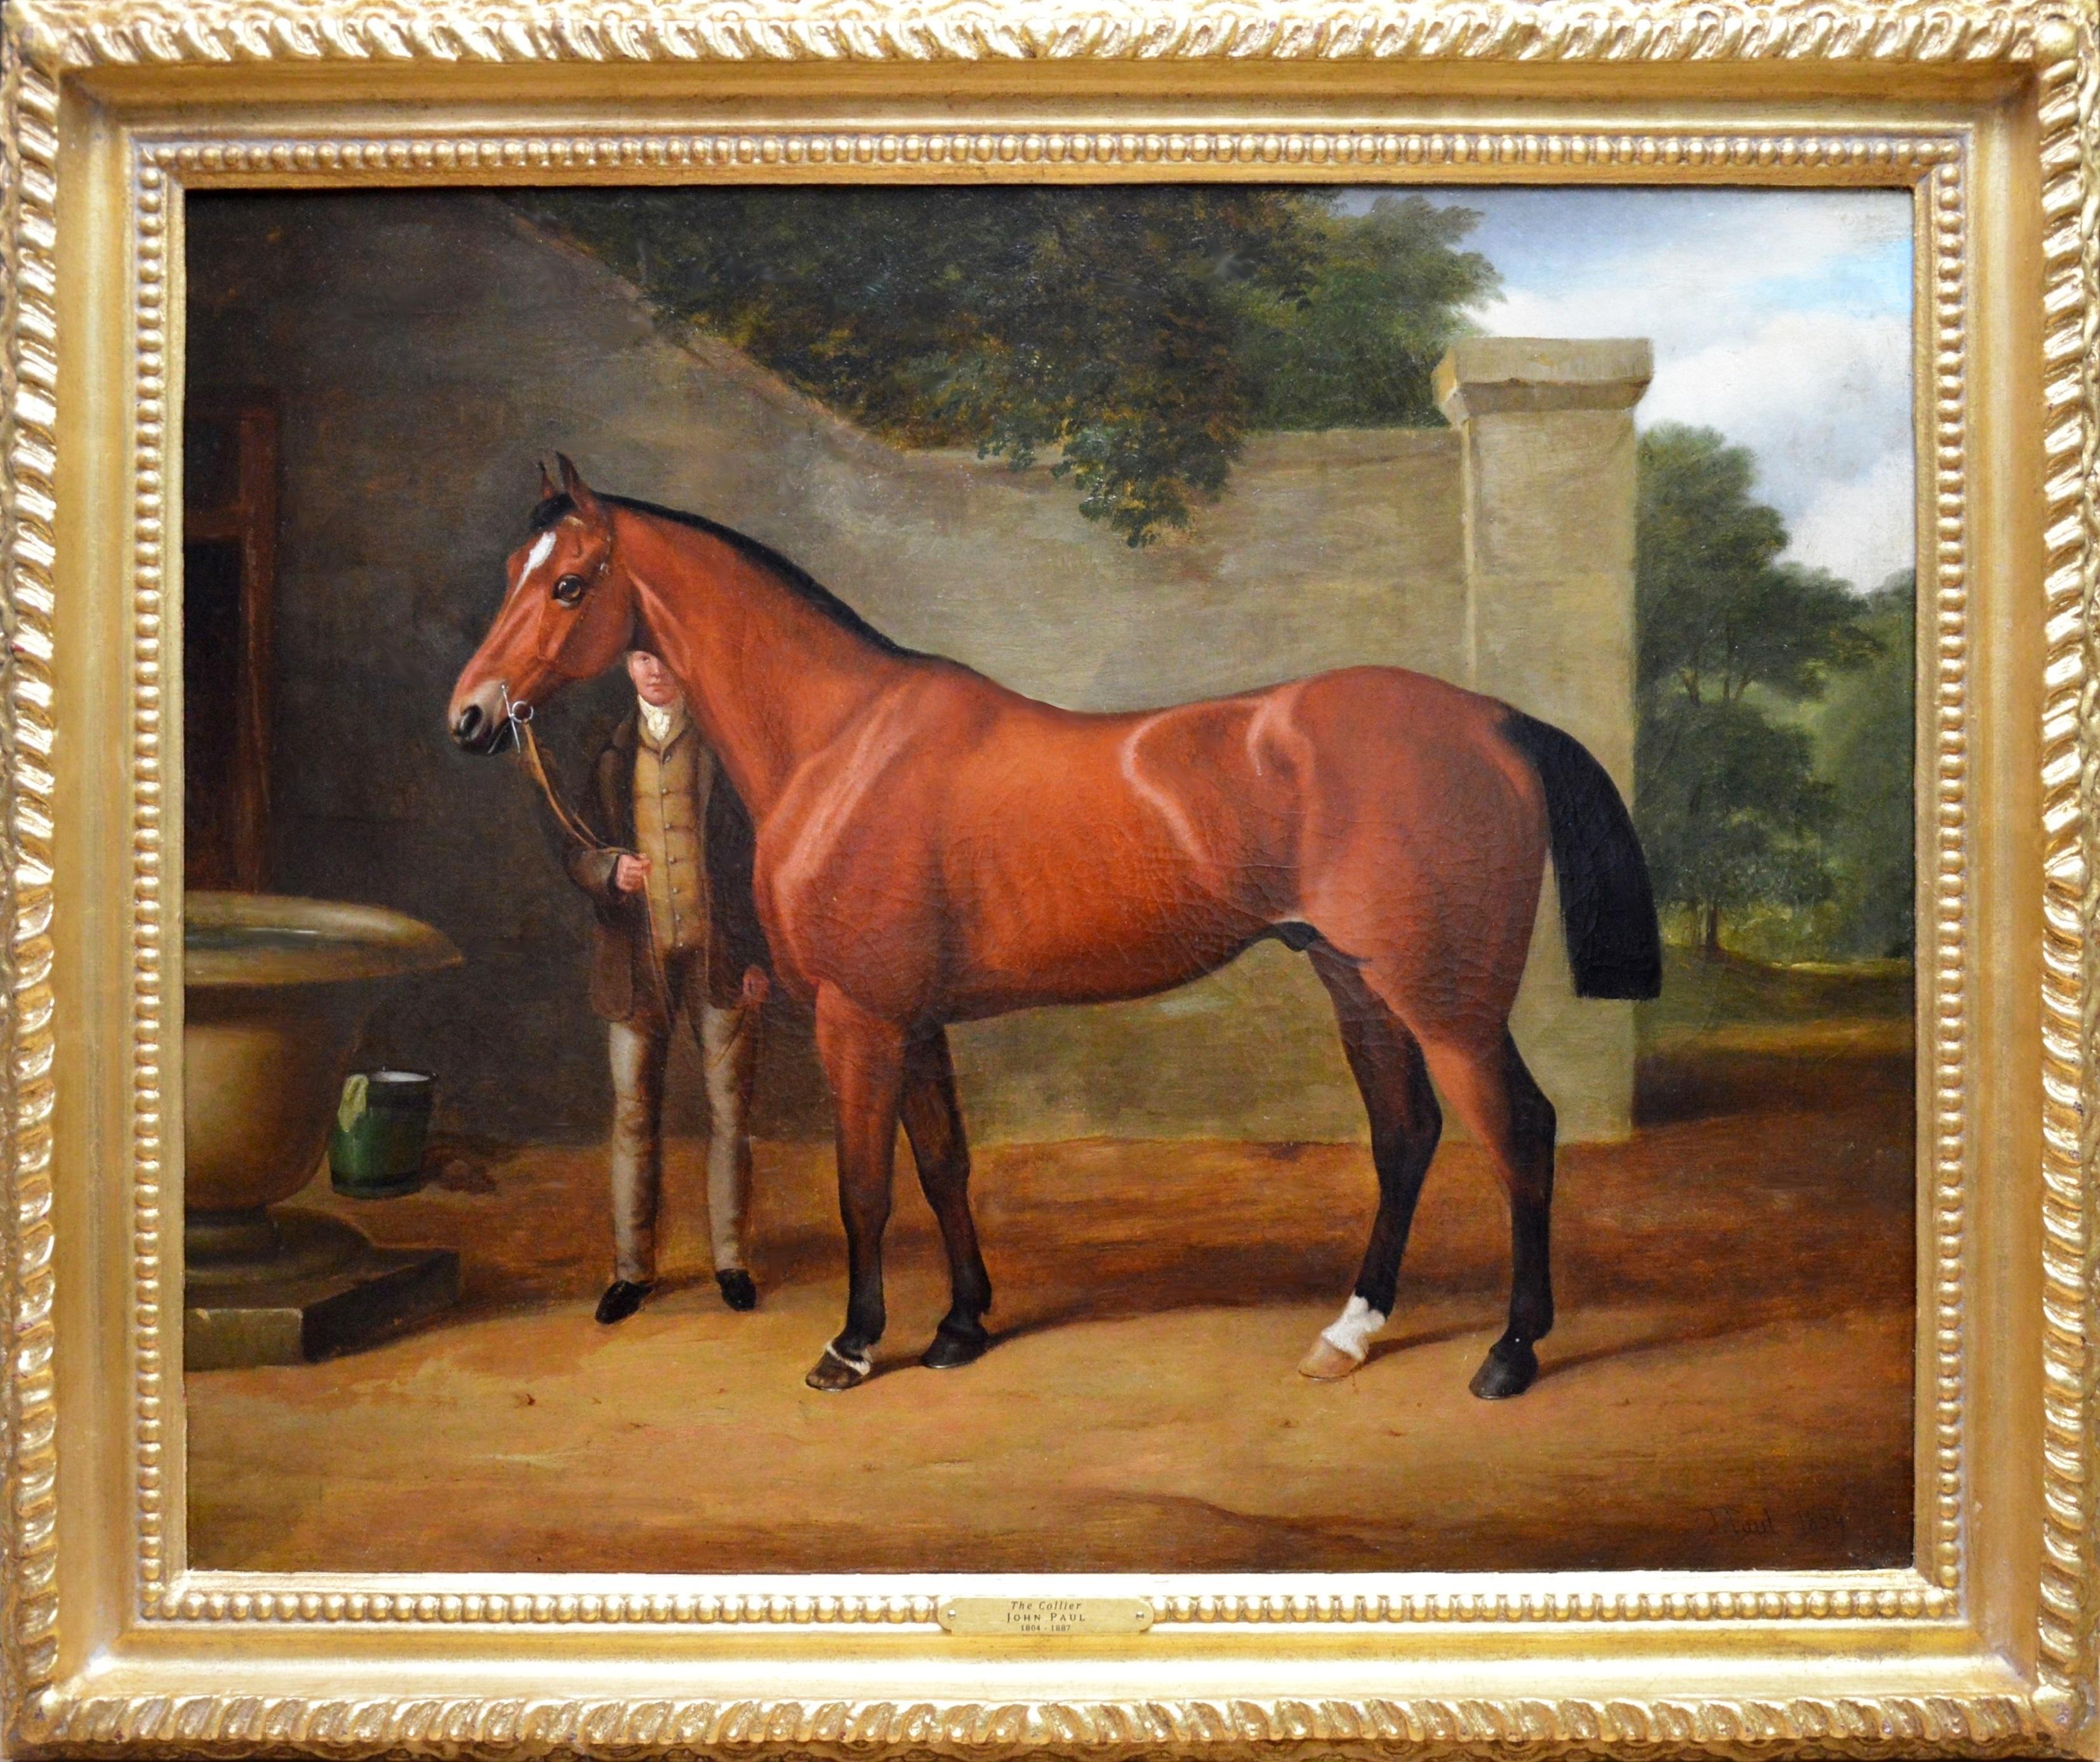 John Paul Portrait Painting - The Collier - Mid 19th Century Equine Oil Painting Portrait English Thoroughbred